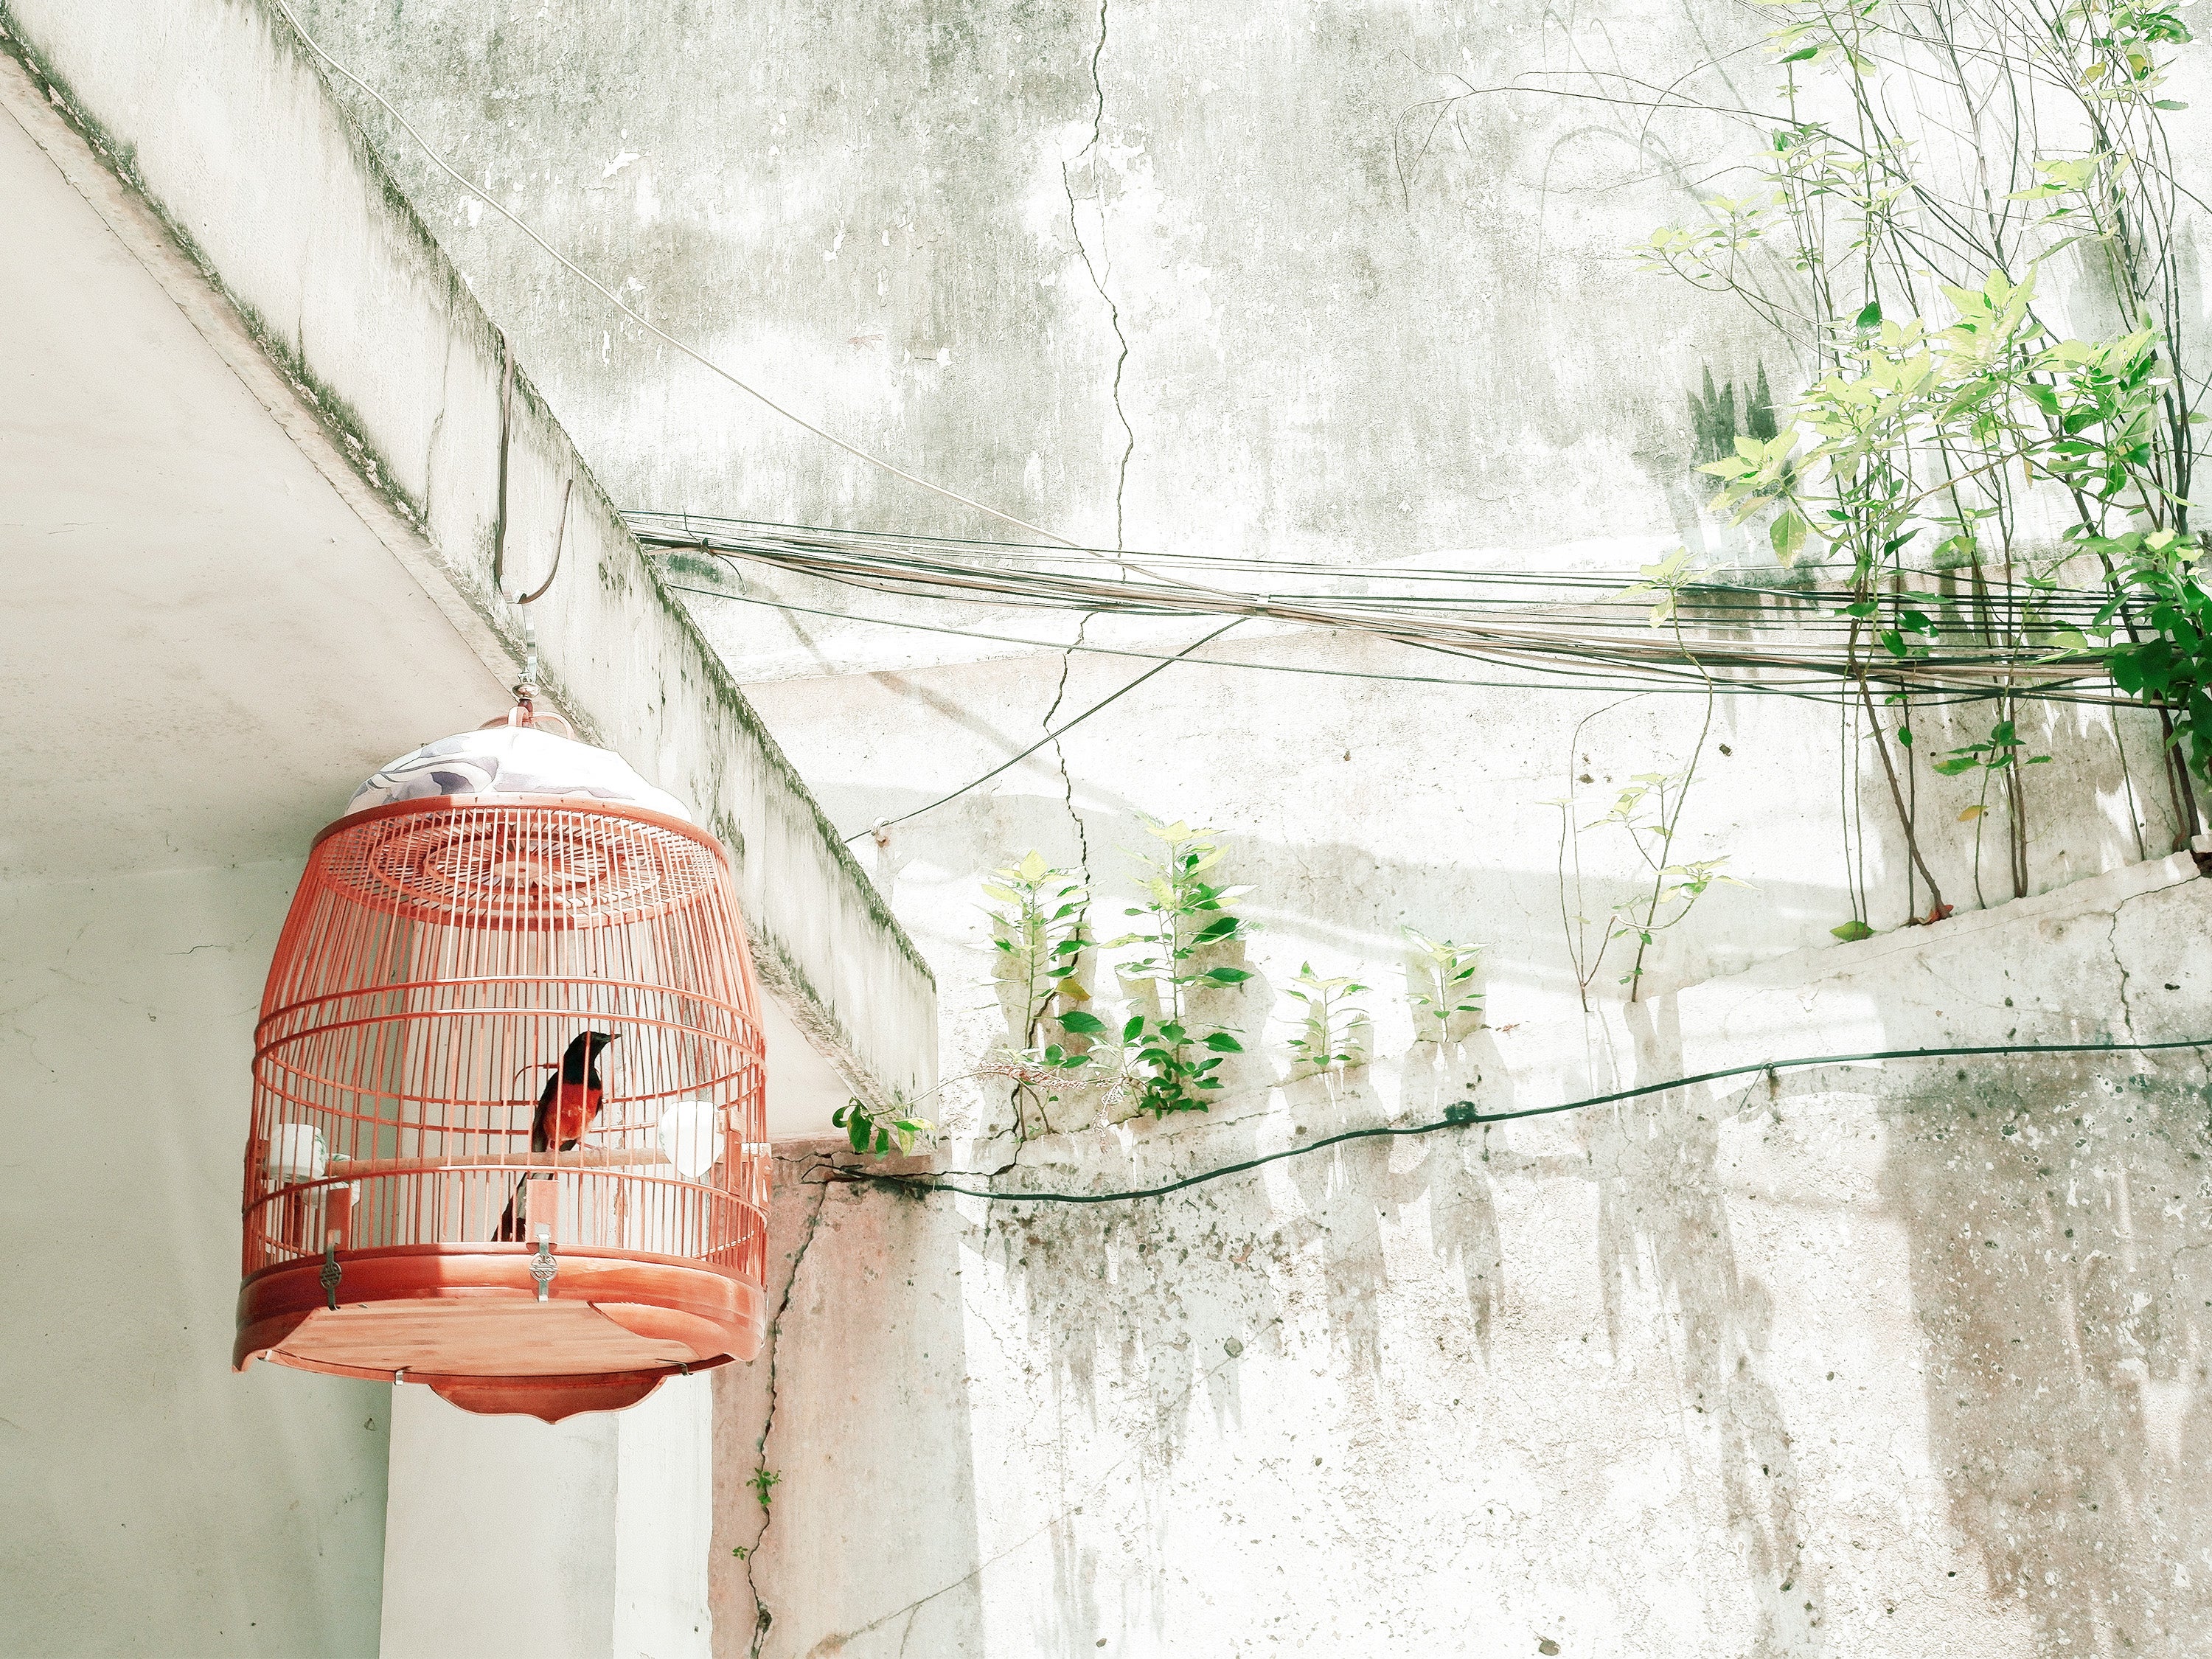 a song bird in a cage